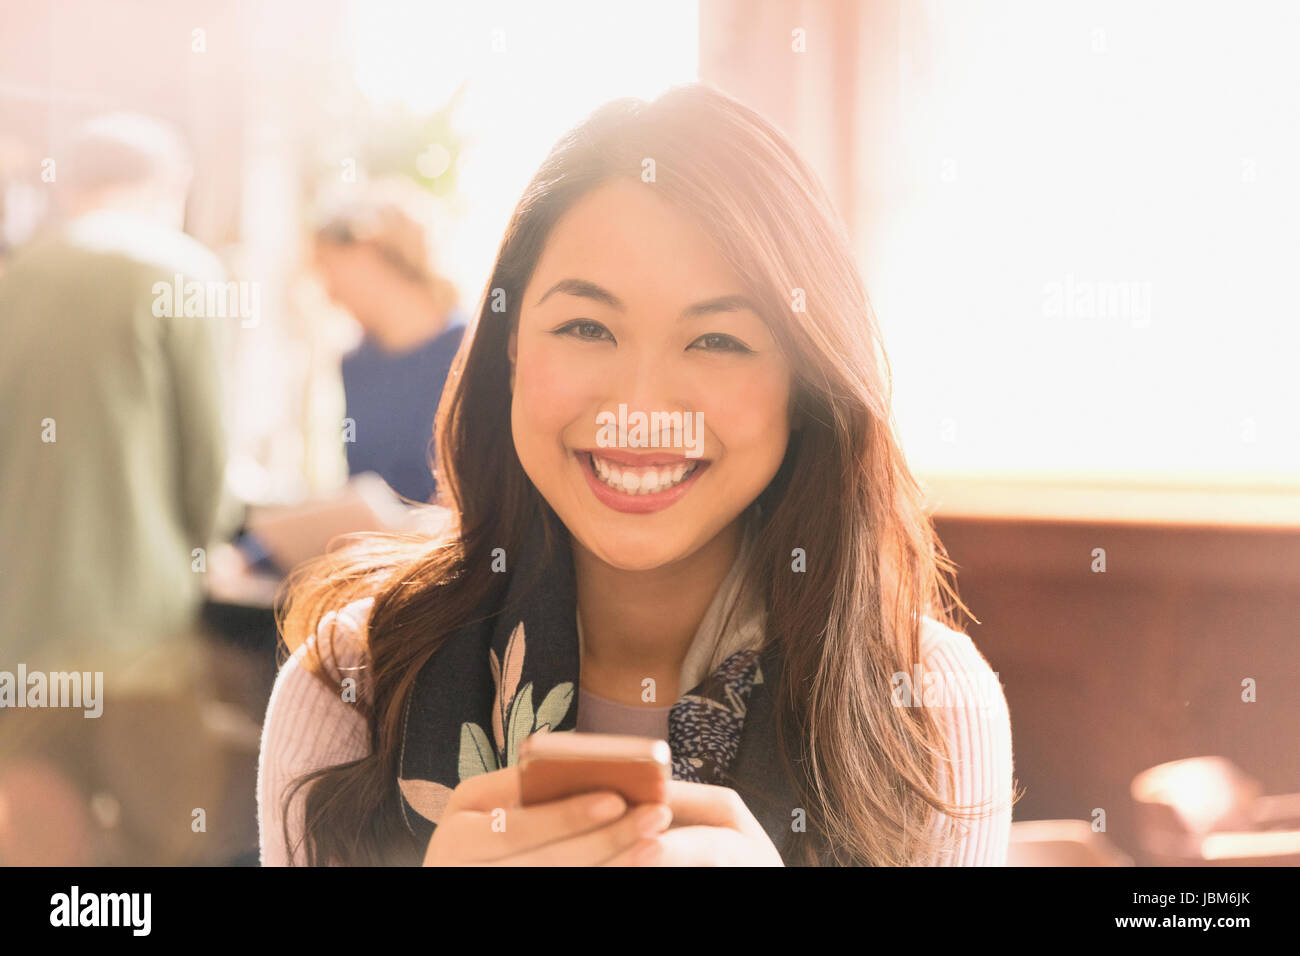 Portrait smiling Chinese woman texting with cell phone in cafe Stock Photo